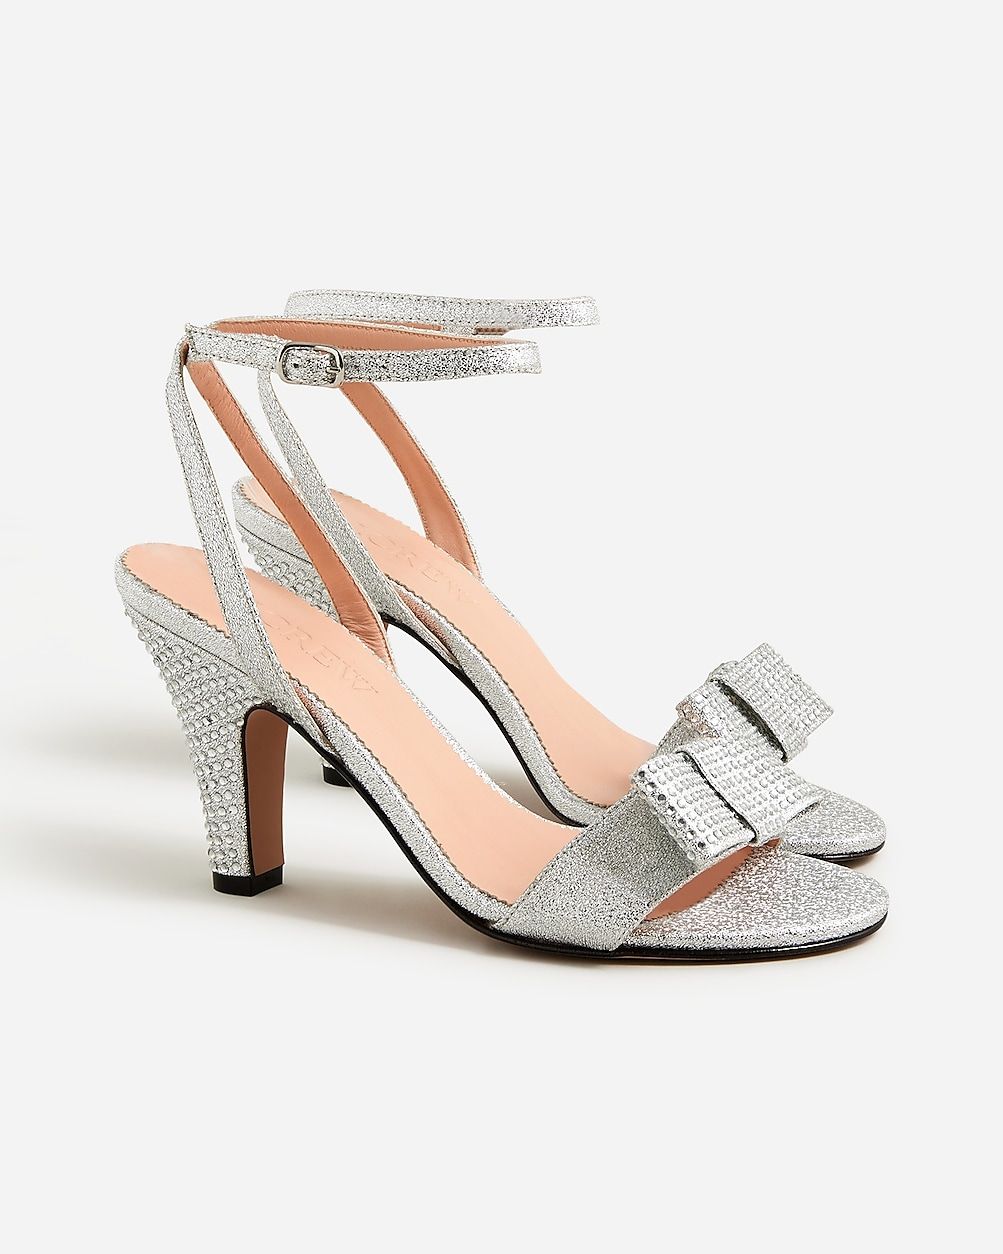 Made-in-Italy crystal bow heels in lamé | J.Crew US